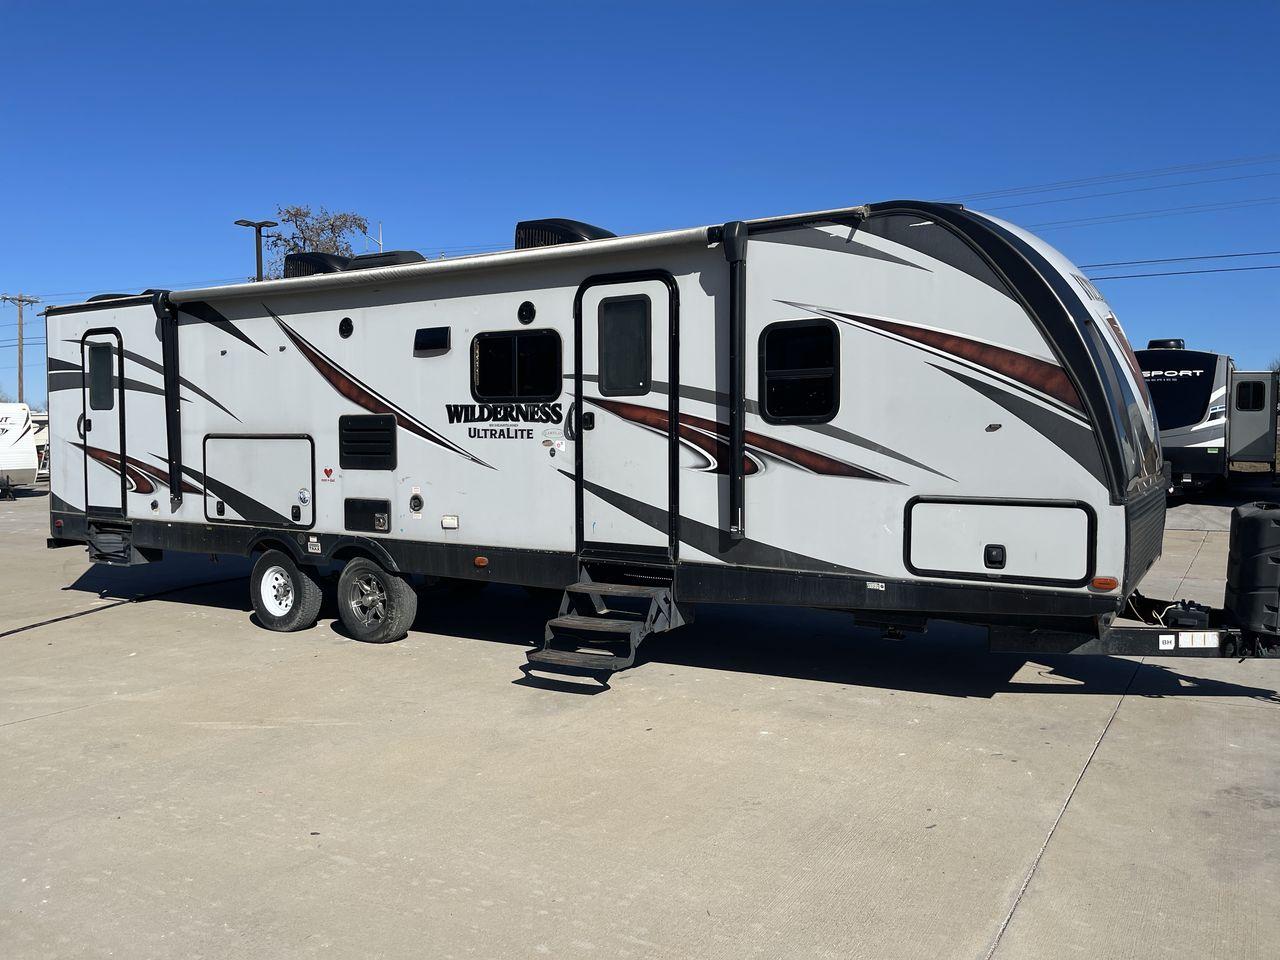 2018 GRAY HEARTLAND WILDERNESS USED 3125 (5SFNB3526JE) , Length: 35.75 ft. | Dry Weight: 6,840 lbs. | Gross Weight: 8,600 lbs. | Slides: 1 transmission, located at 4319 N Main Street, Cleburne, TX, 76033, (817) 221-0660, 32.435829, -97.384178 - Discover your inner adventurer with the Heartland Wilderness 3125 travel trailer from 2018. This RV offers the ideal balance of roomy living, contemporary conveniences, and tough sturdiness for your outdoor adventures. It is designed for individuals who desire both comfort and exploration. The dimen - Photo #22